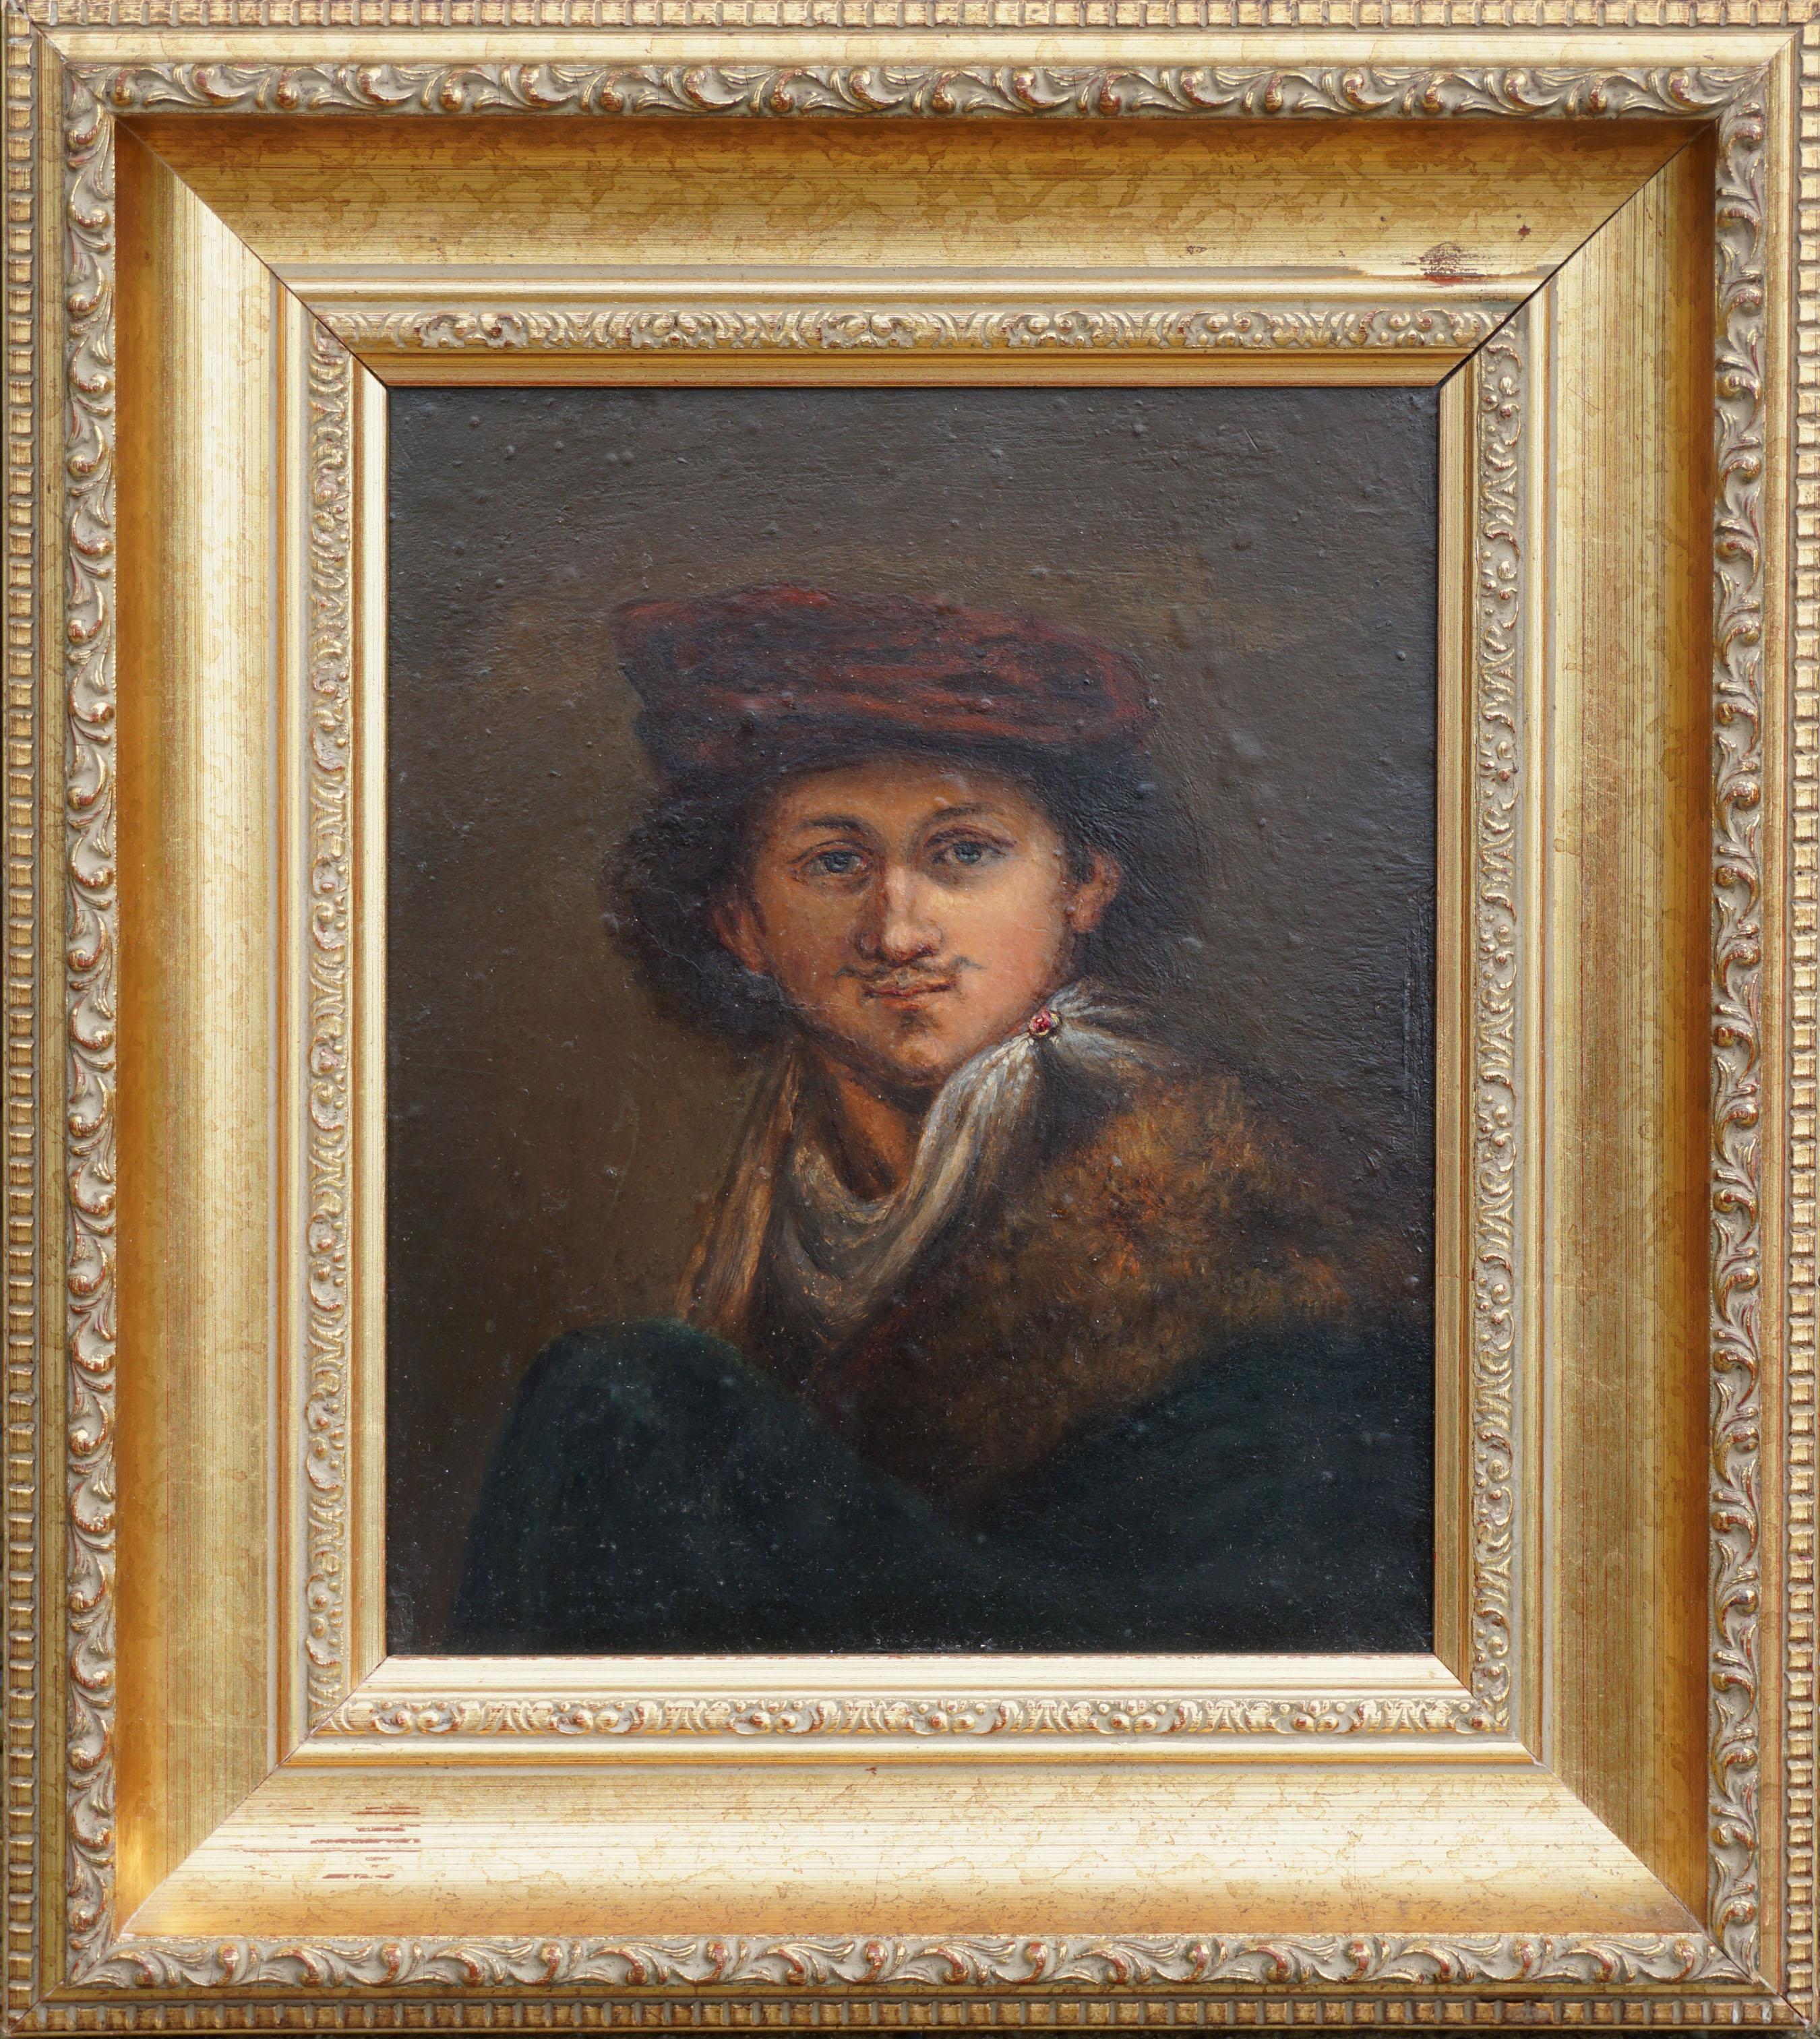 Unknown Figurative Painting - 19th Century Study of Self Portrait of Rembrandt as a Young Man